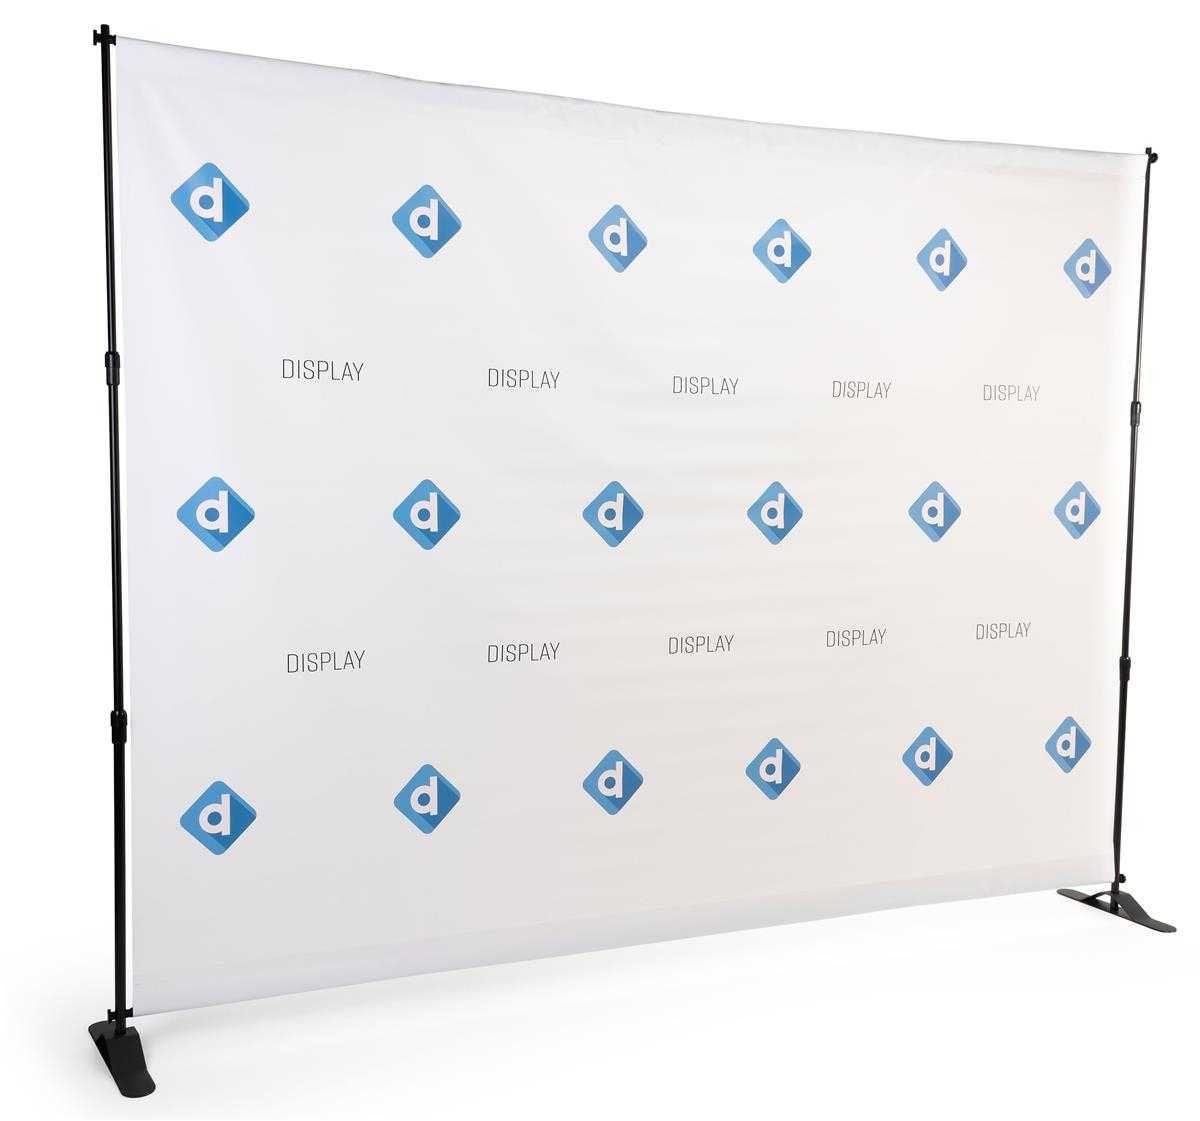 032 Gr8Sap Ra1 Zoom Step And Repeat Banner Template Pertaining To Step And Repeat Banner Template